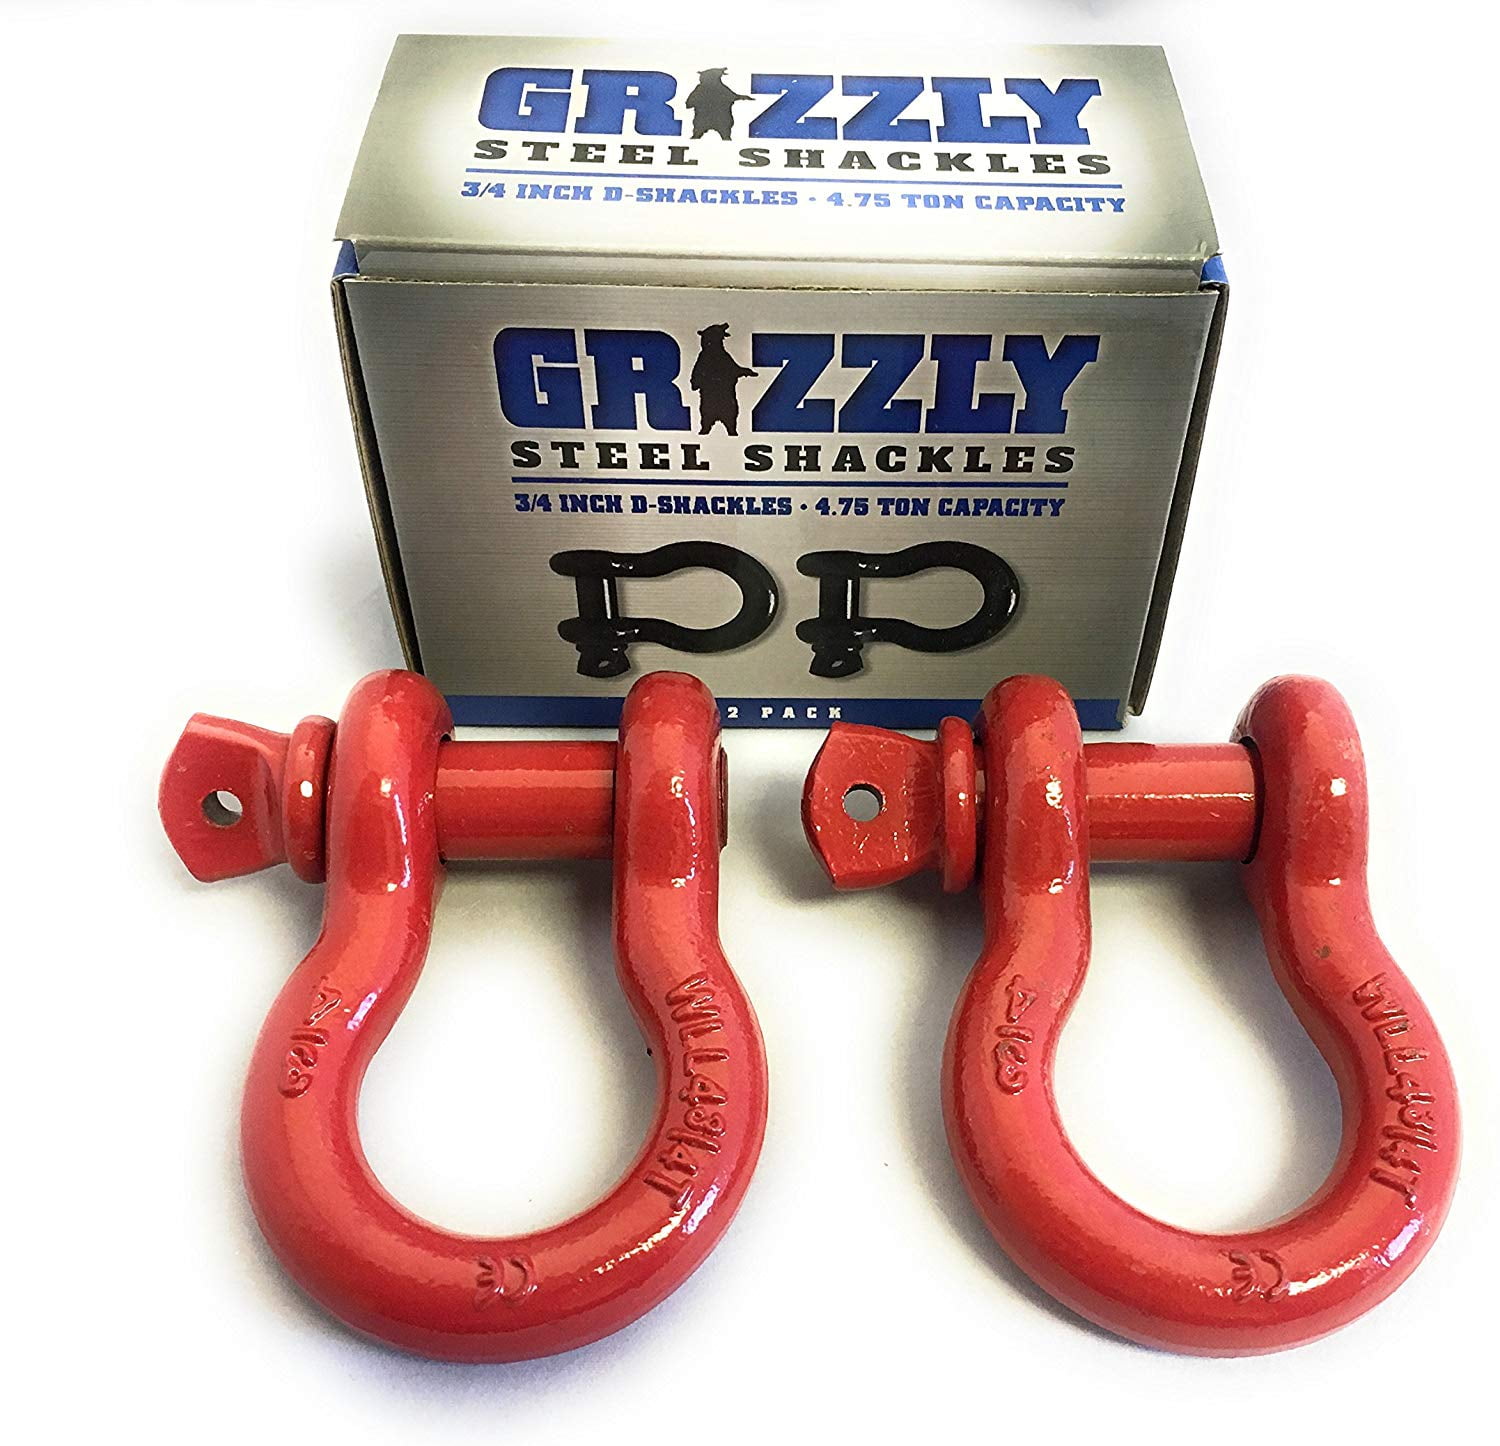 Ideal for Jeeps Red 2 Pack- D Ring Shackles 3/4 INCH ATV’s Snatch Straps,Snatch Block,Tree Savers Grizzly Trucks to use with Recovery,Towing Heavy Duty Forged Steel with 4.75 Ton Capacity 